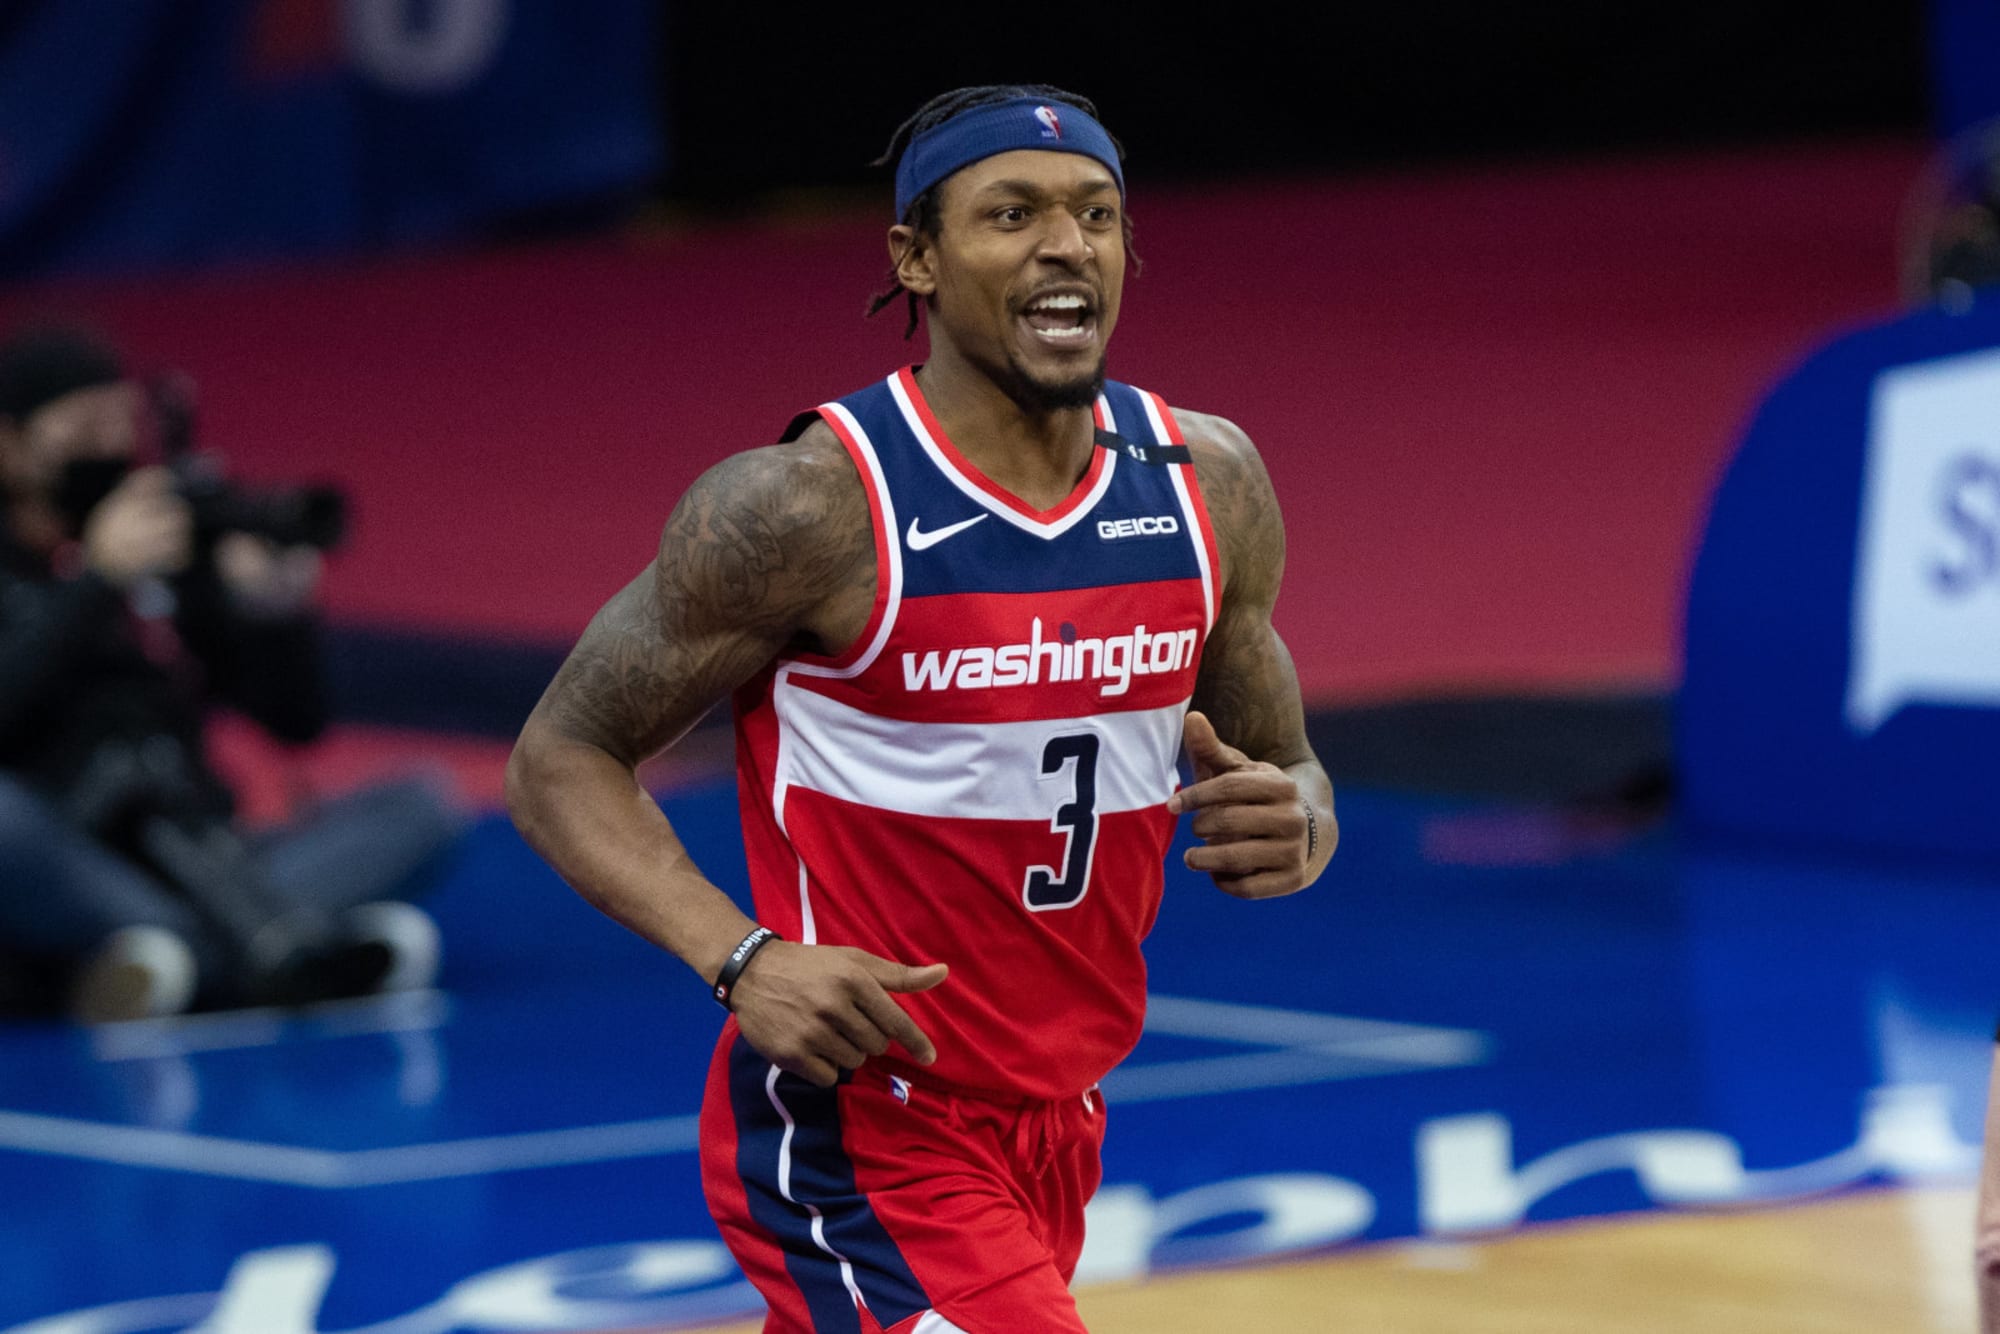 Washington Wizards are struggling and freefalling down the standings